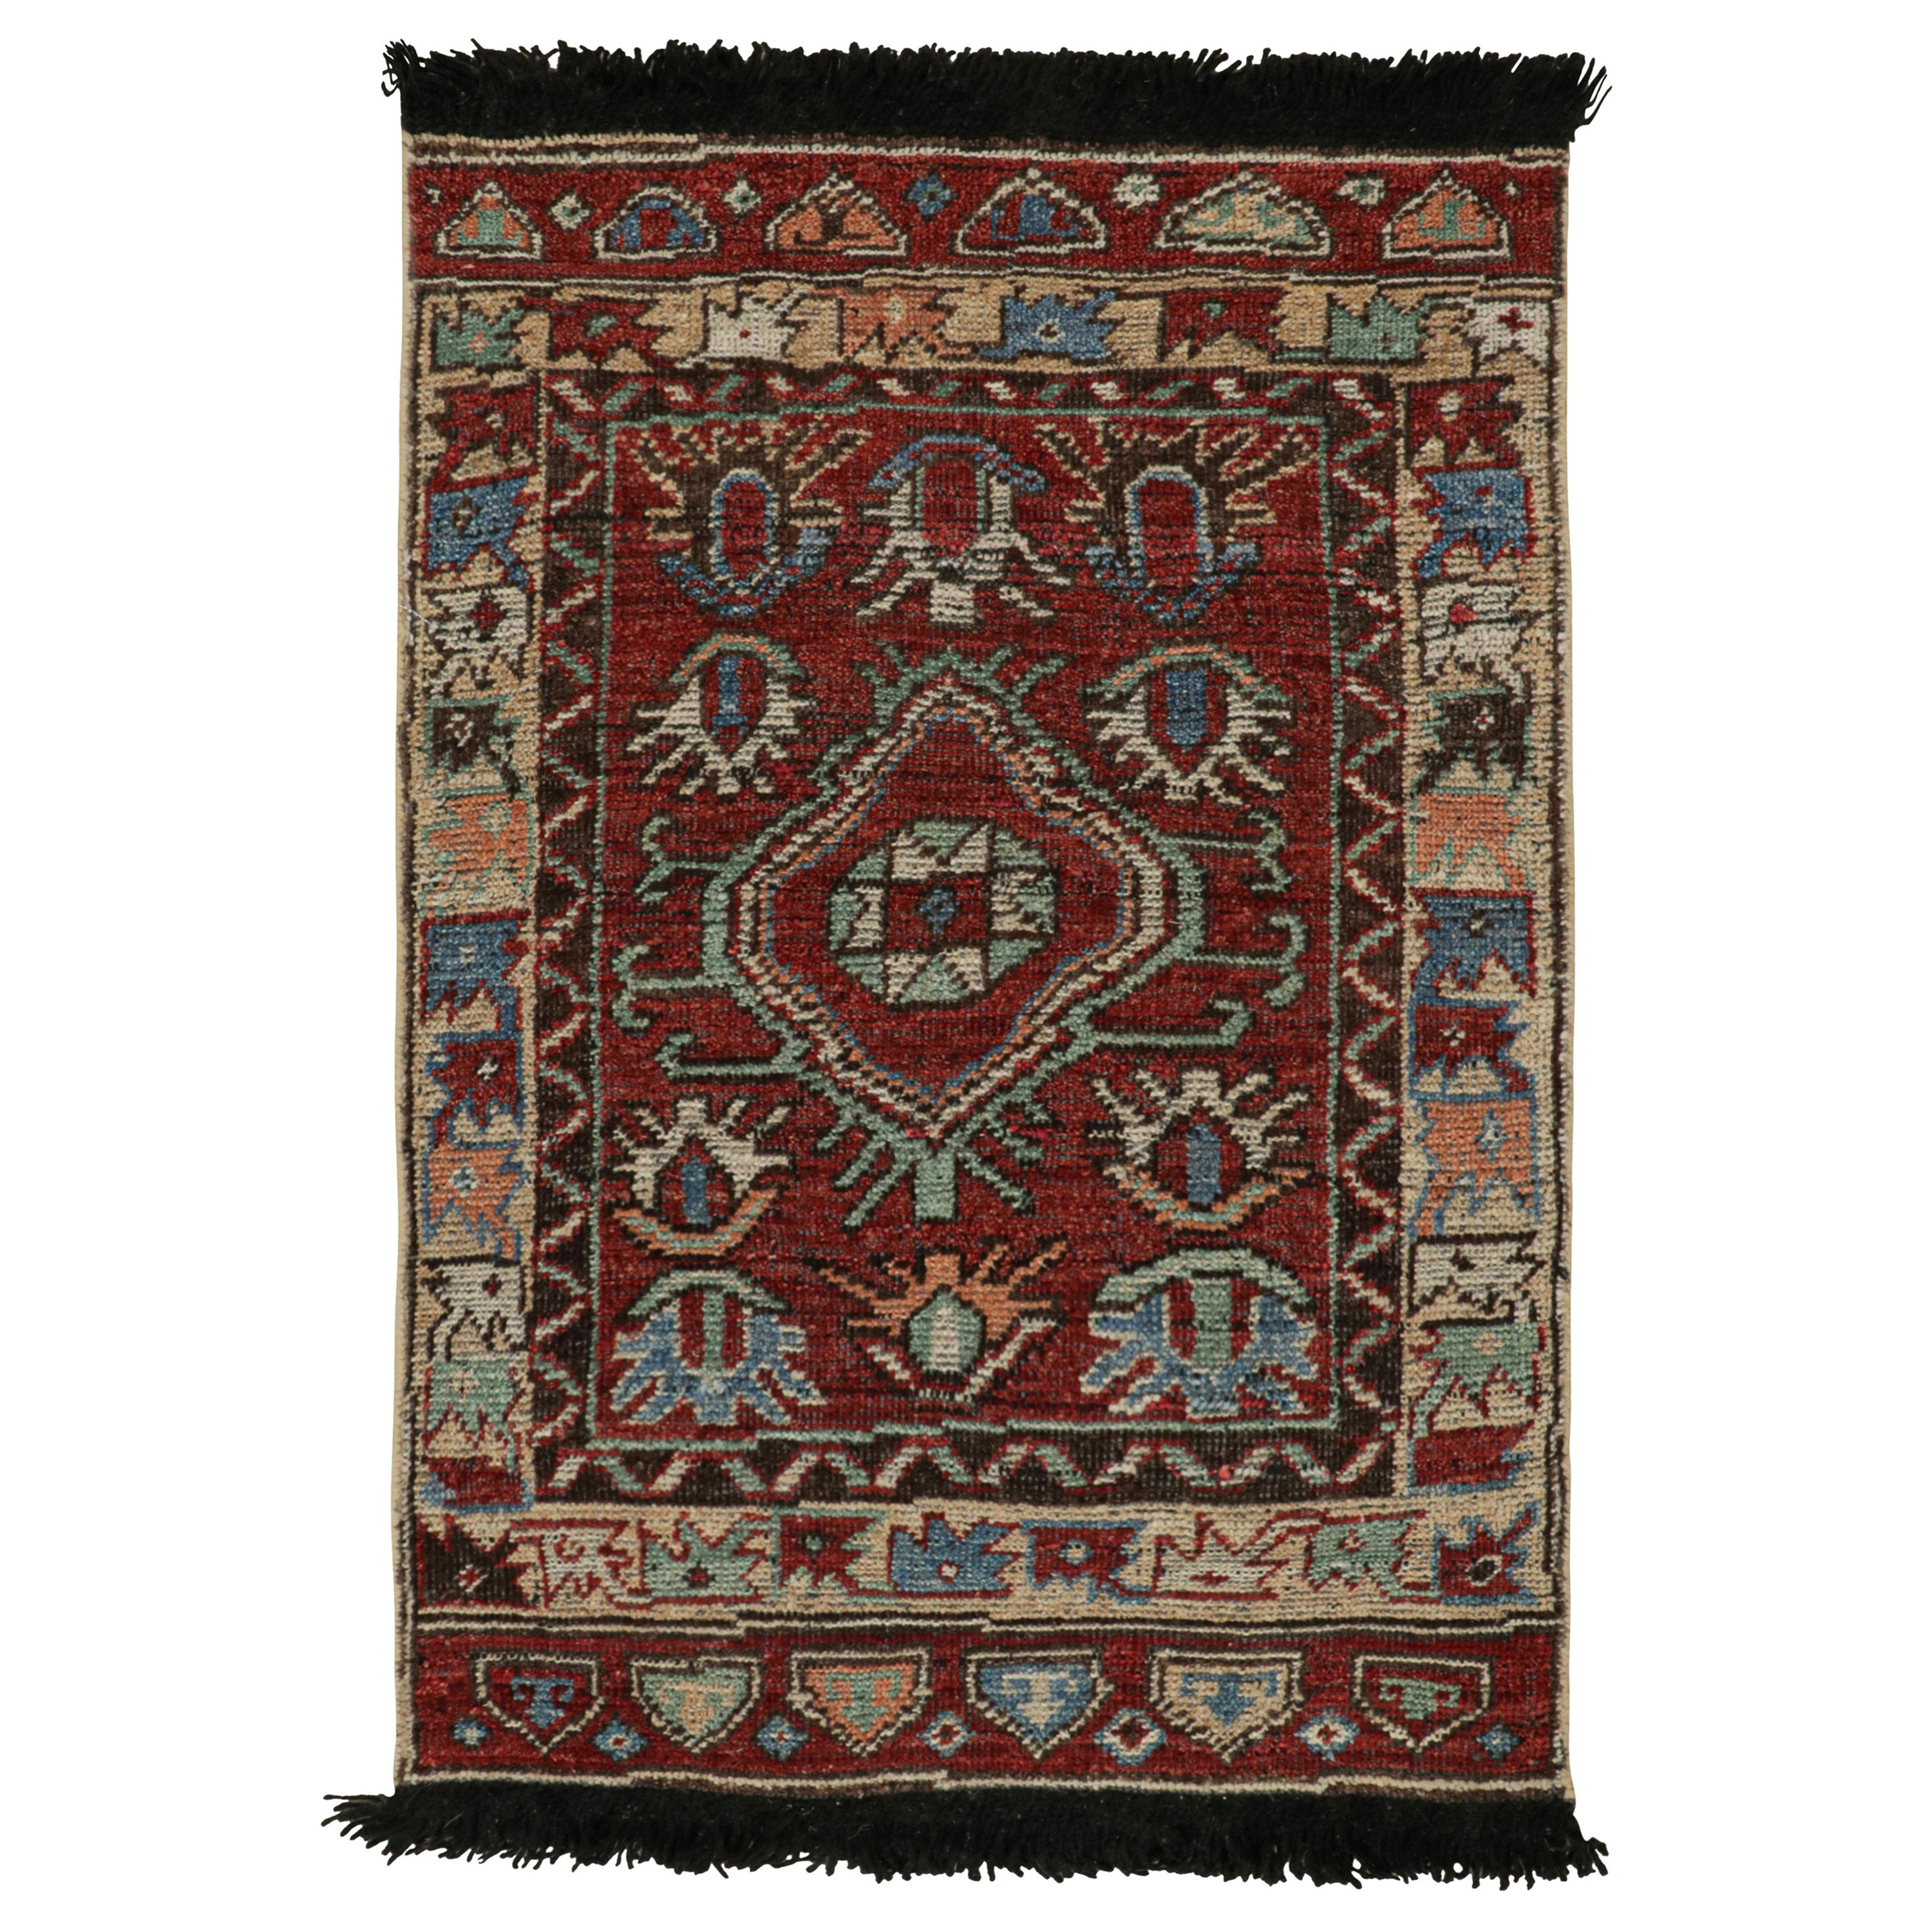 Rug & Kilim’s Antique Tribal Style Rug in Red, Blue, Green & Black Patterns For Sale